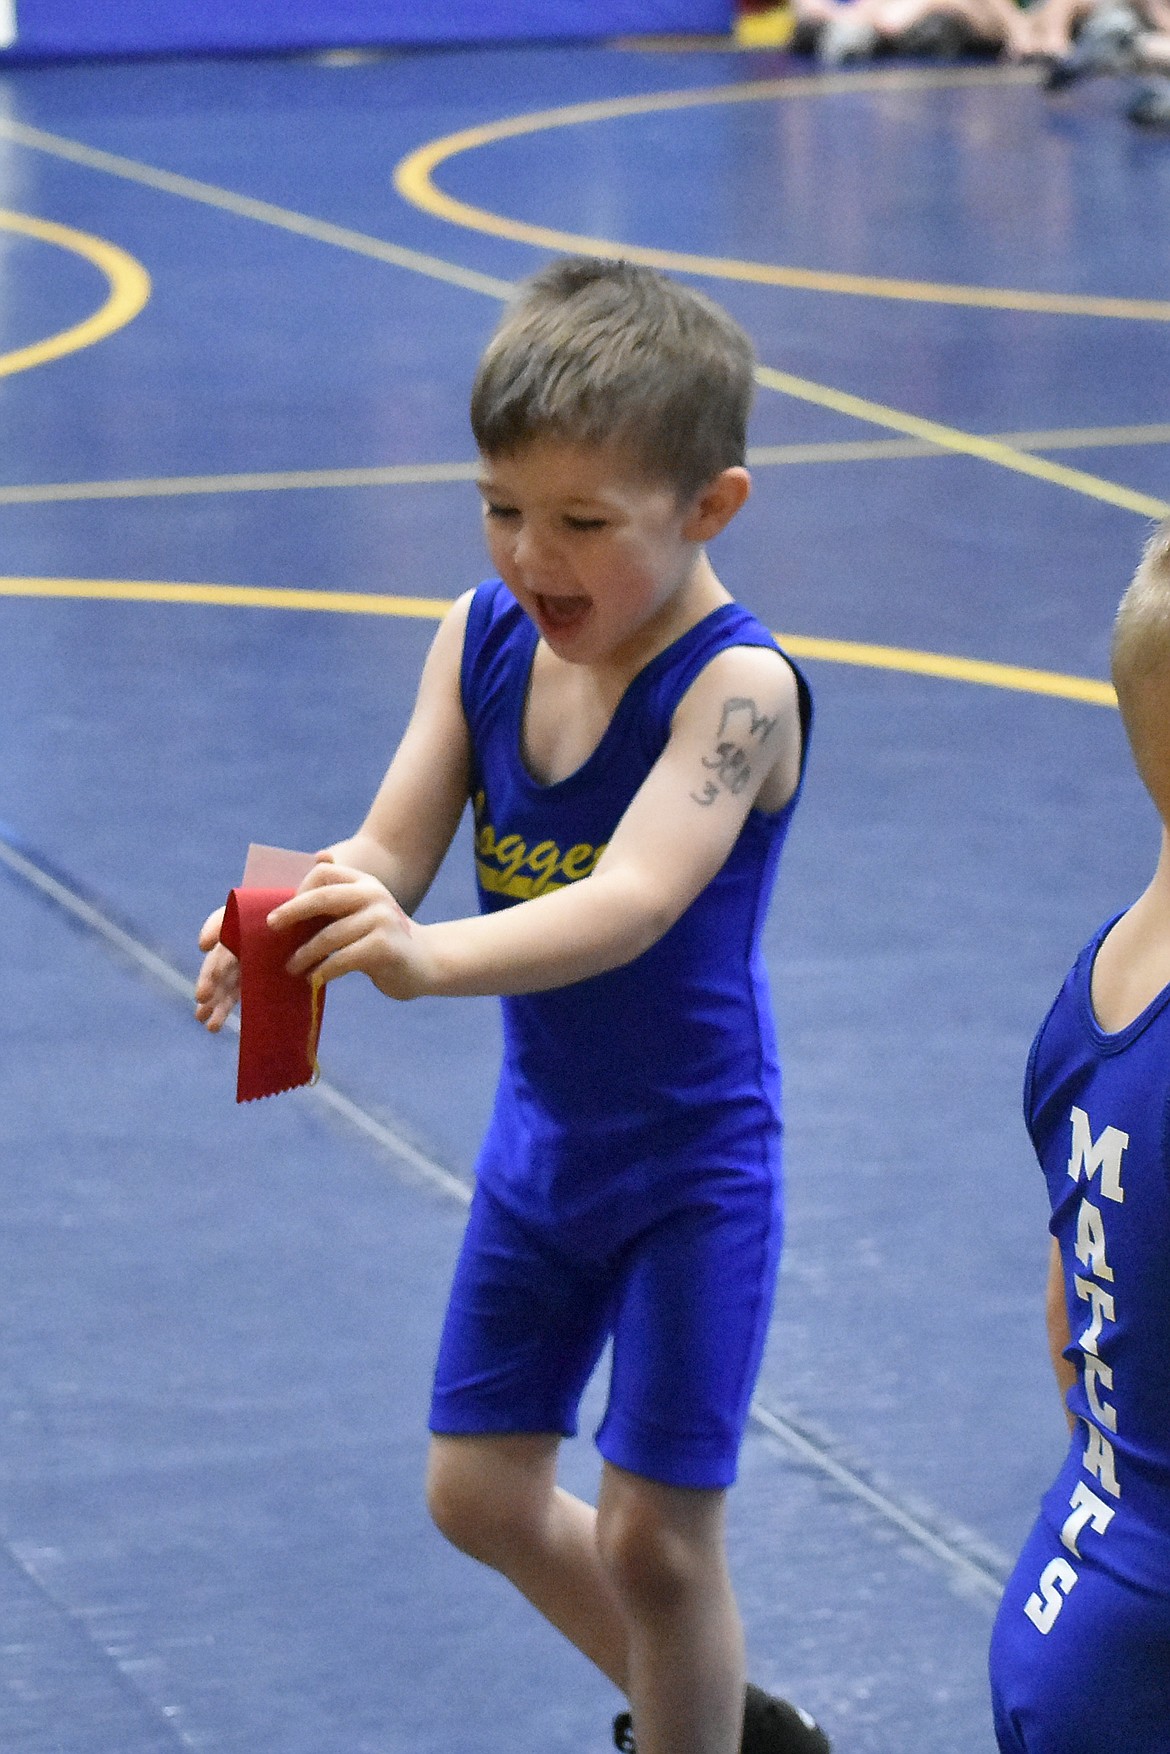 Charles Arnold II walks away with his ribbon after a Pee Wee match during the Kootenai Klassic, March 3. (Ben Kibbey photos/The Western News)